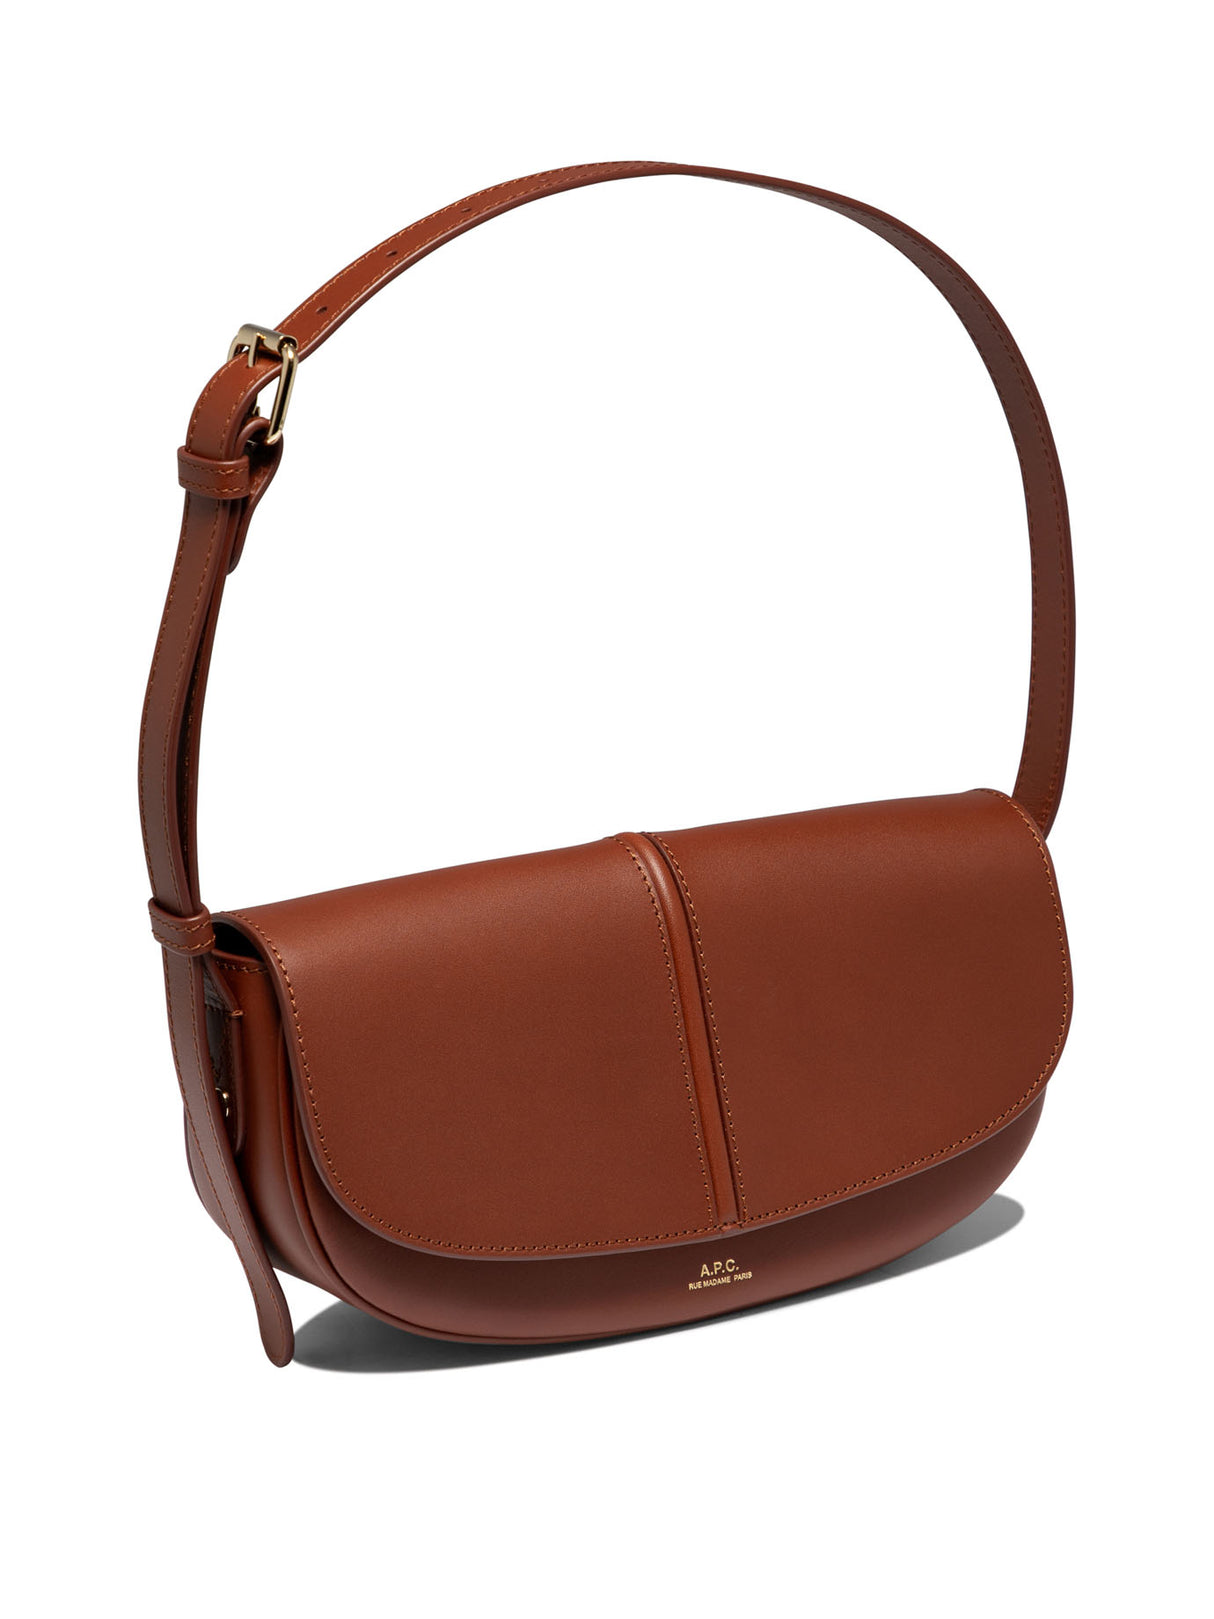 A.P.C. Brown Leather Shoulder Bag for Women - FW24 Collection